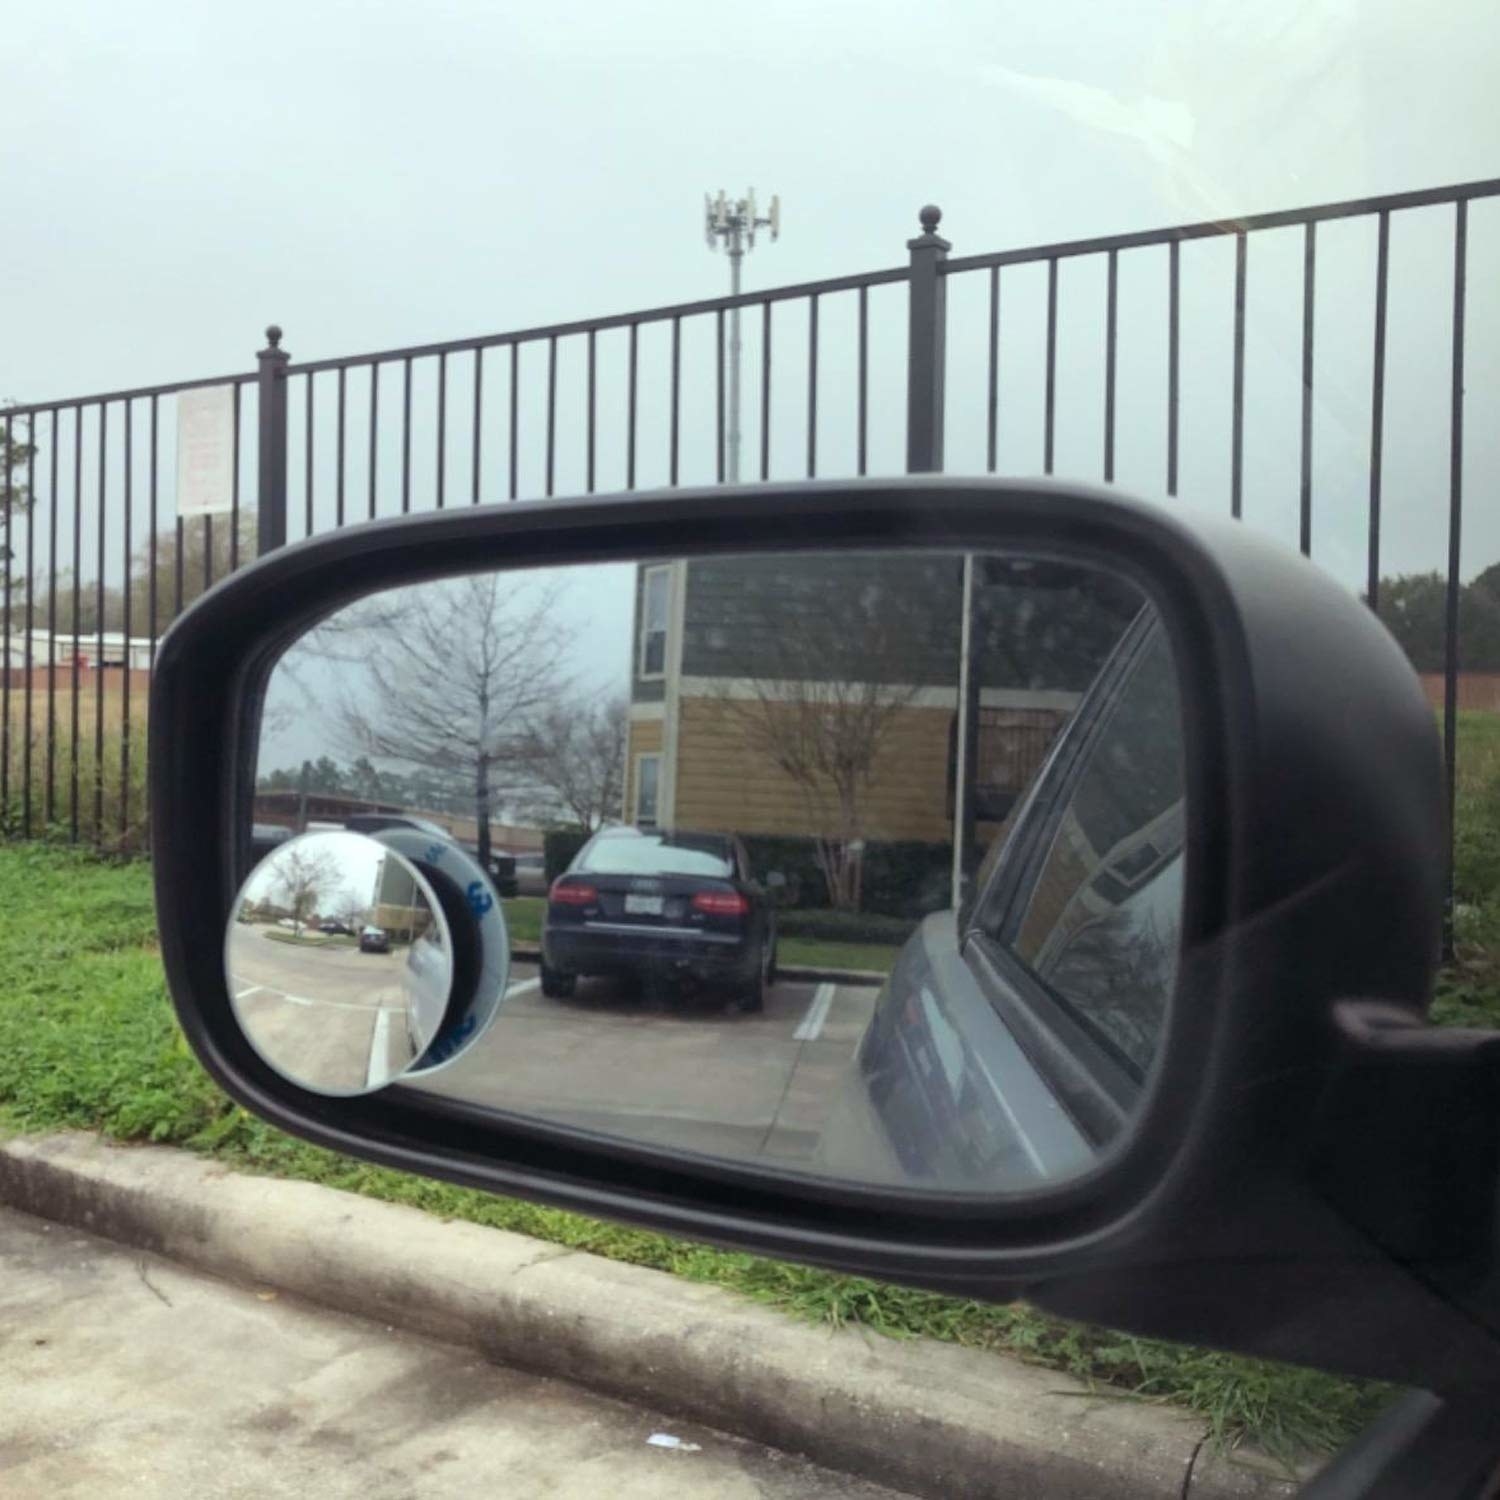 An image of the small round mirror stuck to a car&#x27;s side mirror